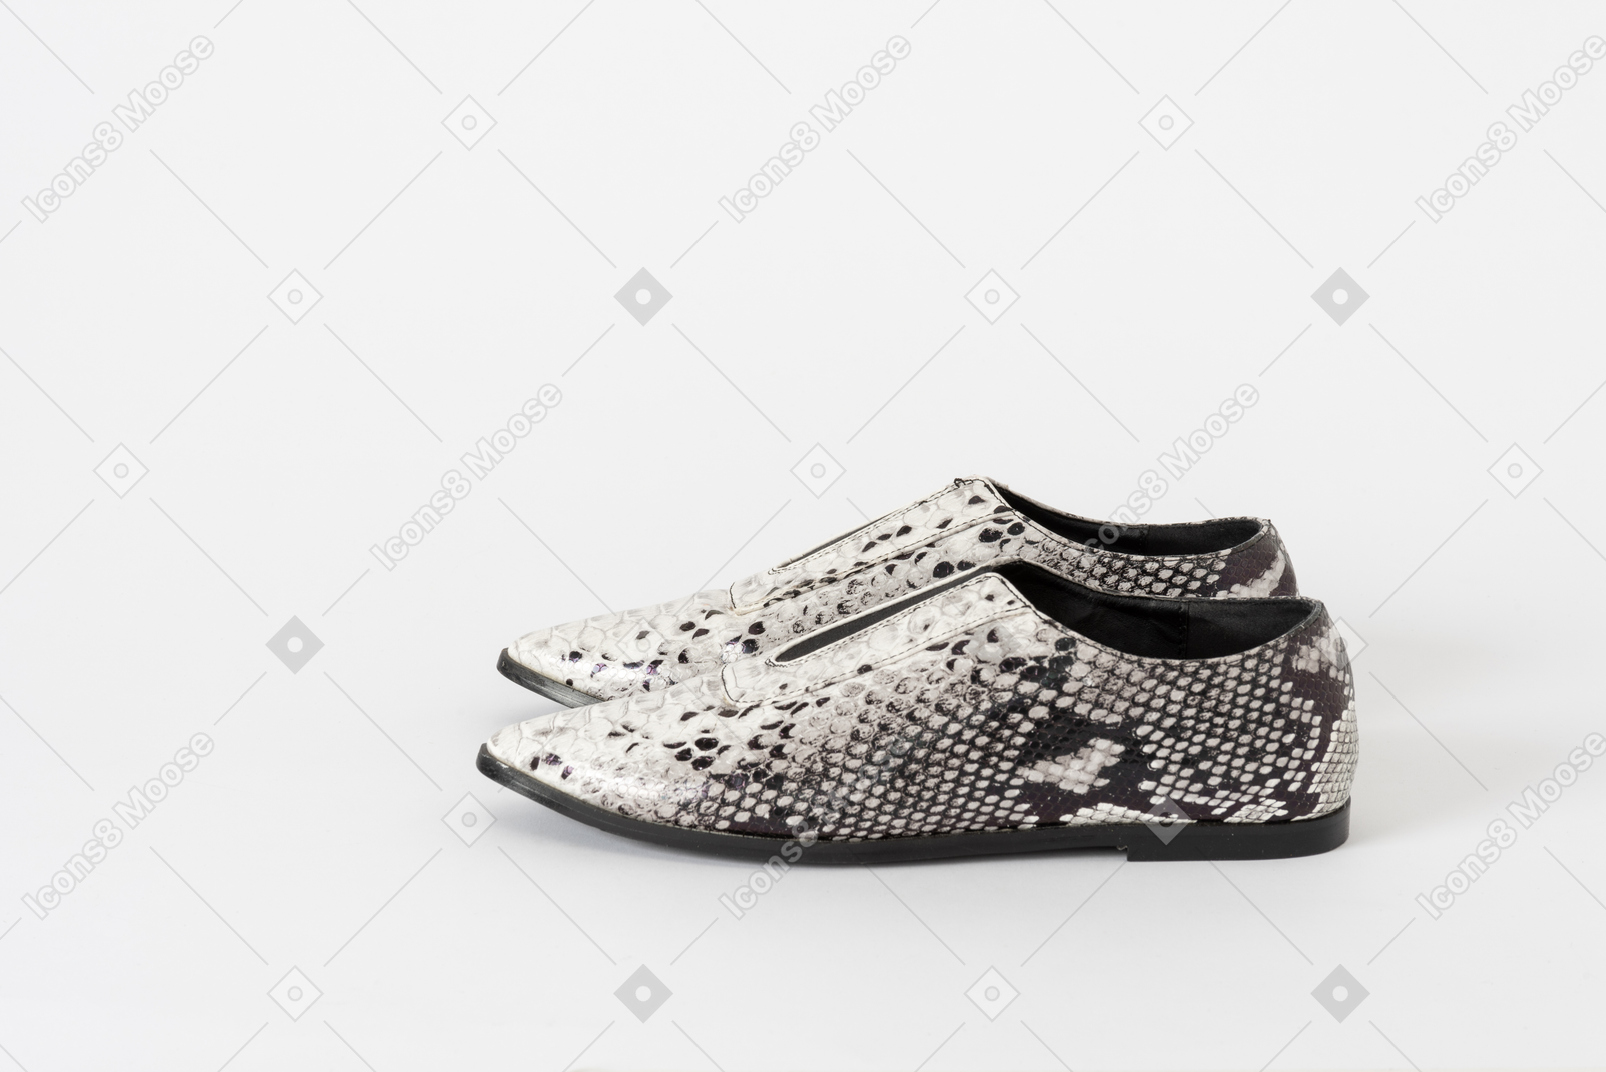 A side shot of a pair of white & black snakeskin flat shoes